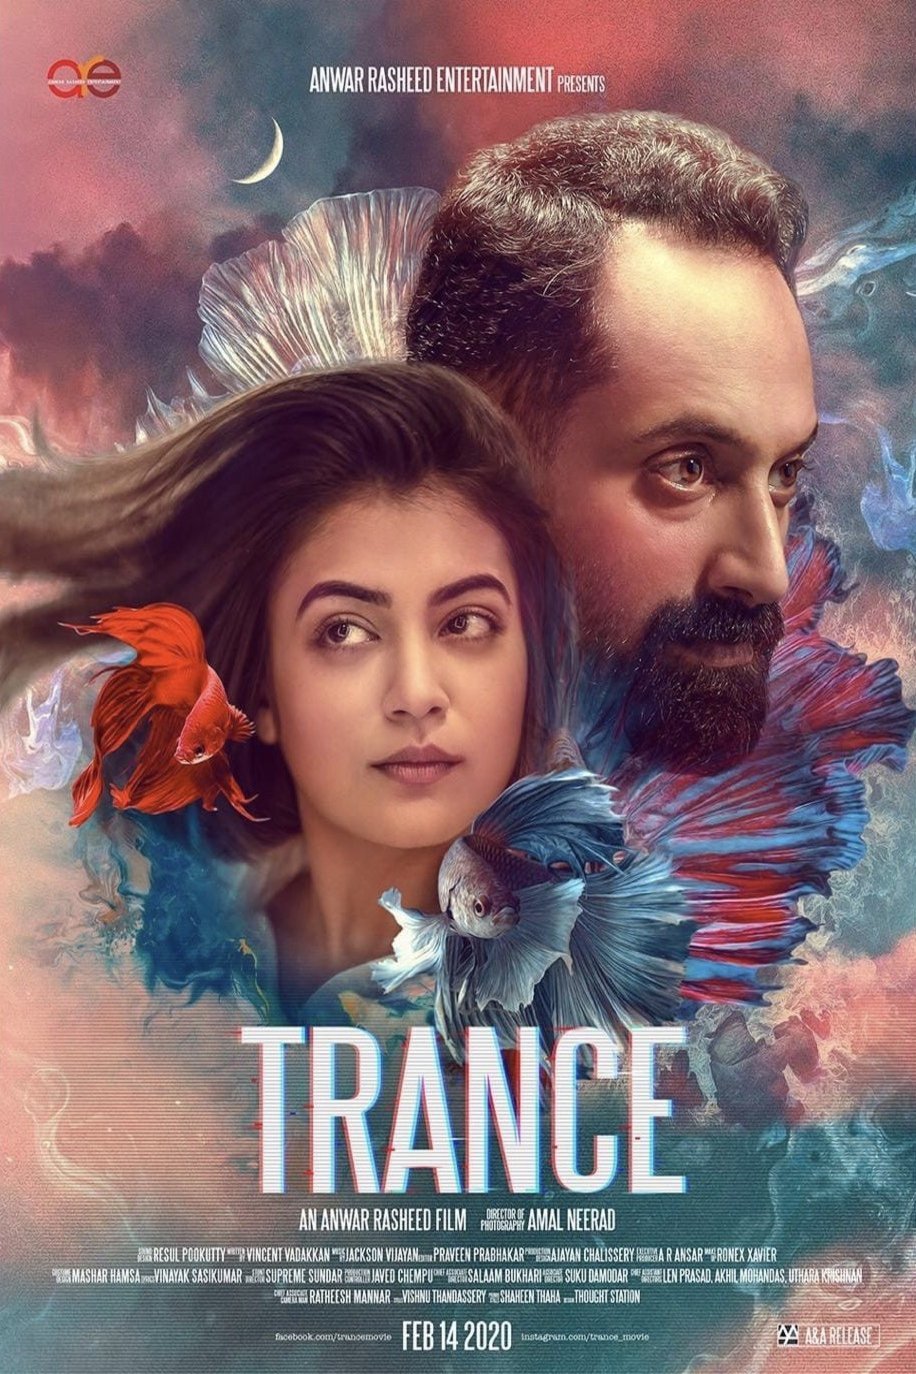 Malayalam poster of the movie Trance